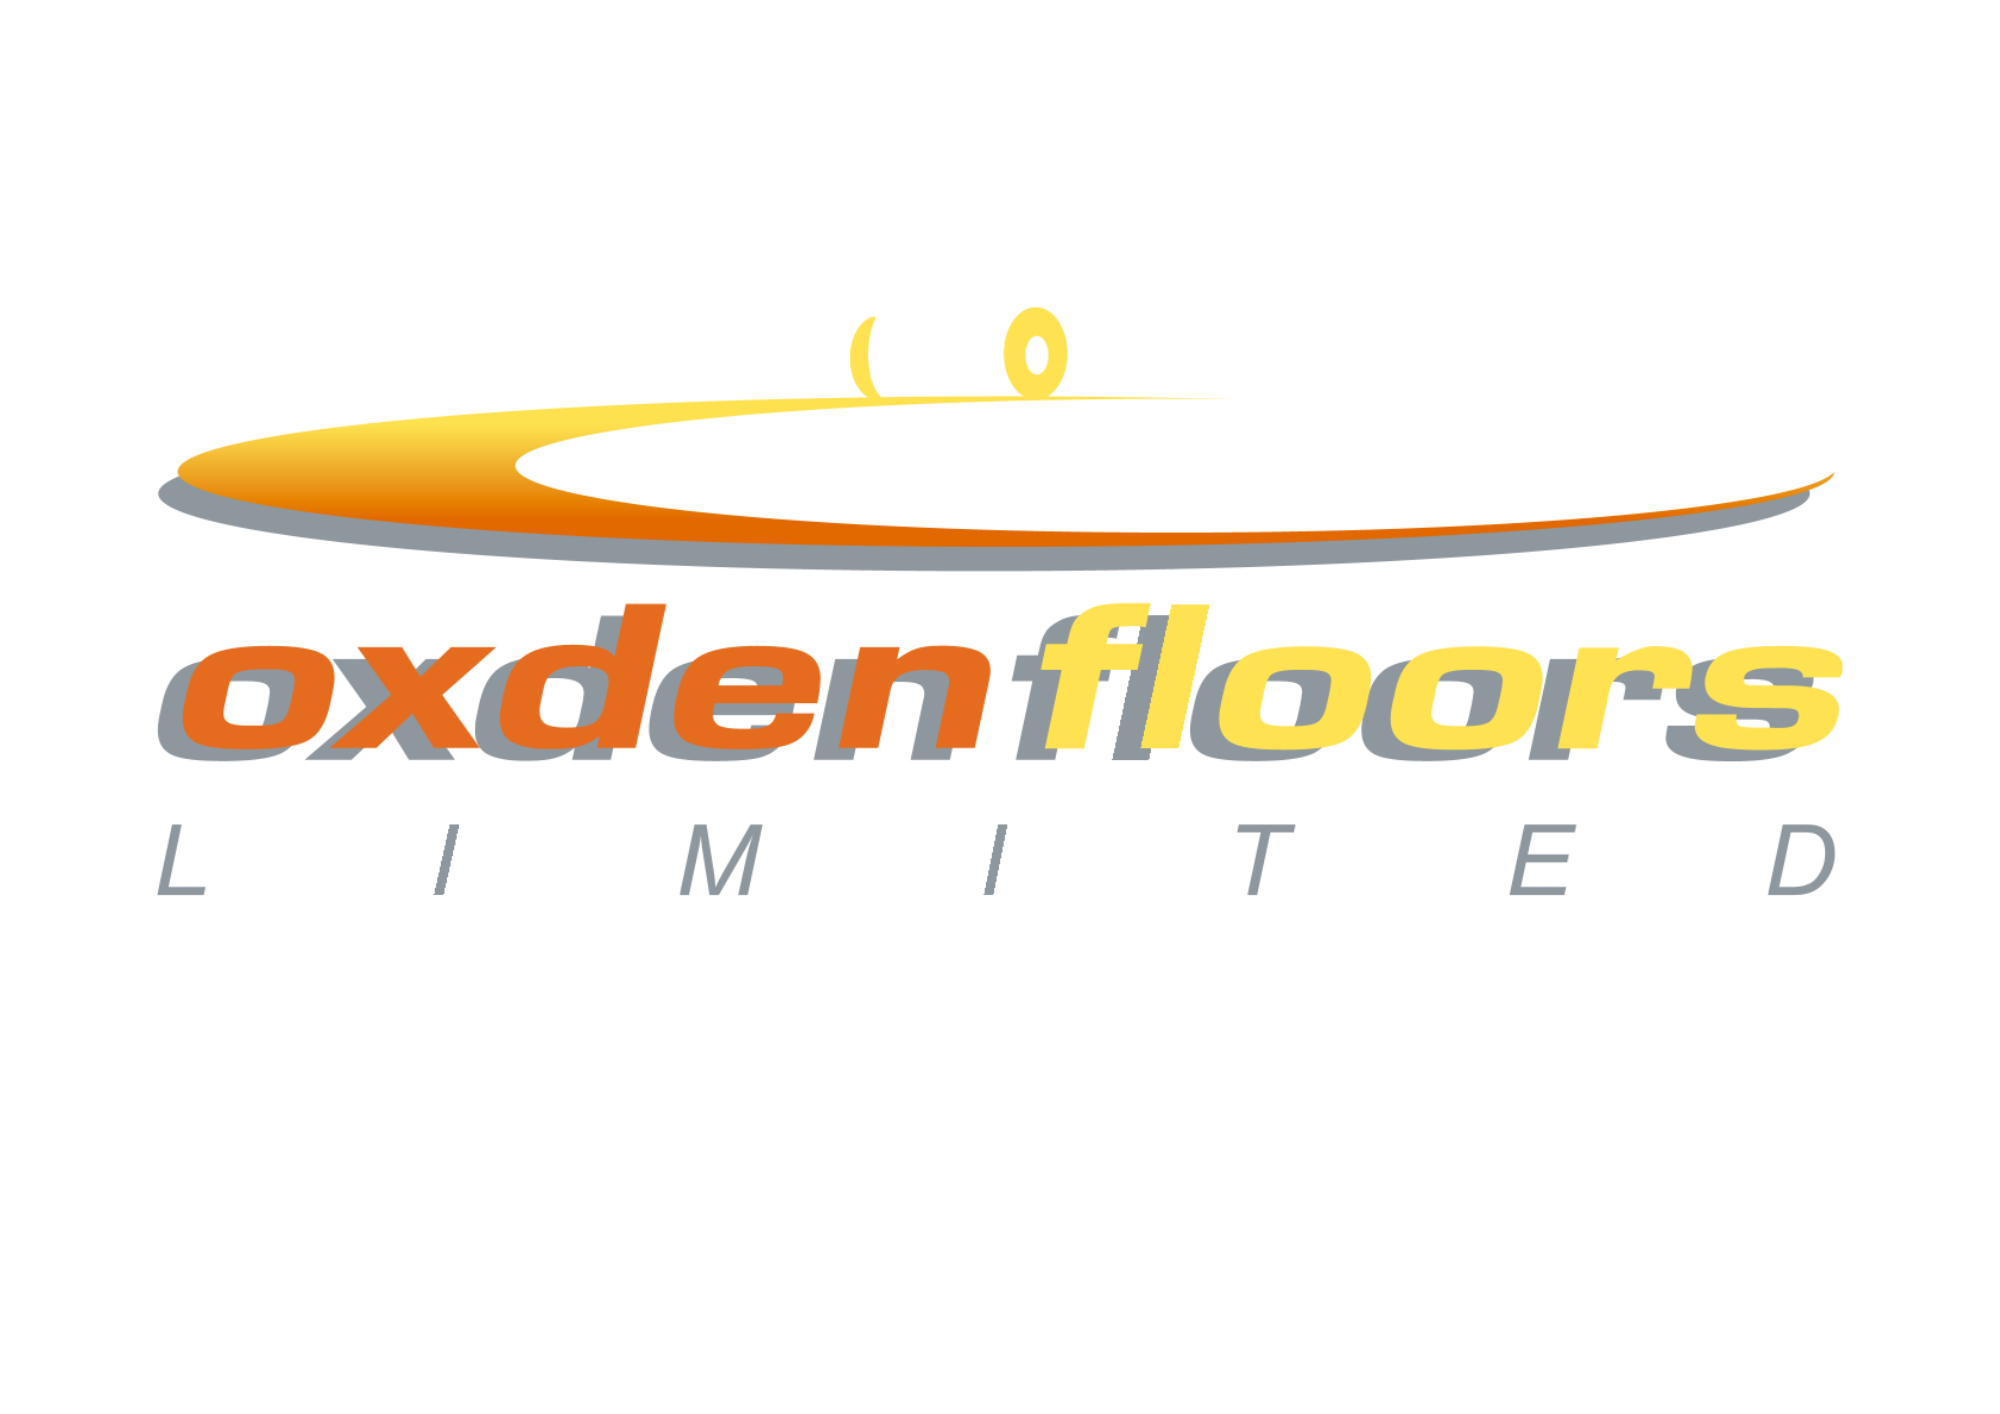 Oxden Floors NEW Logo - HIGH RES.pdf.png